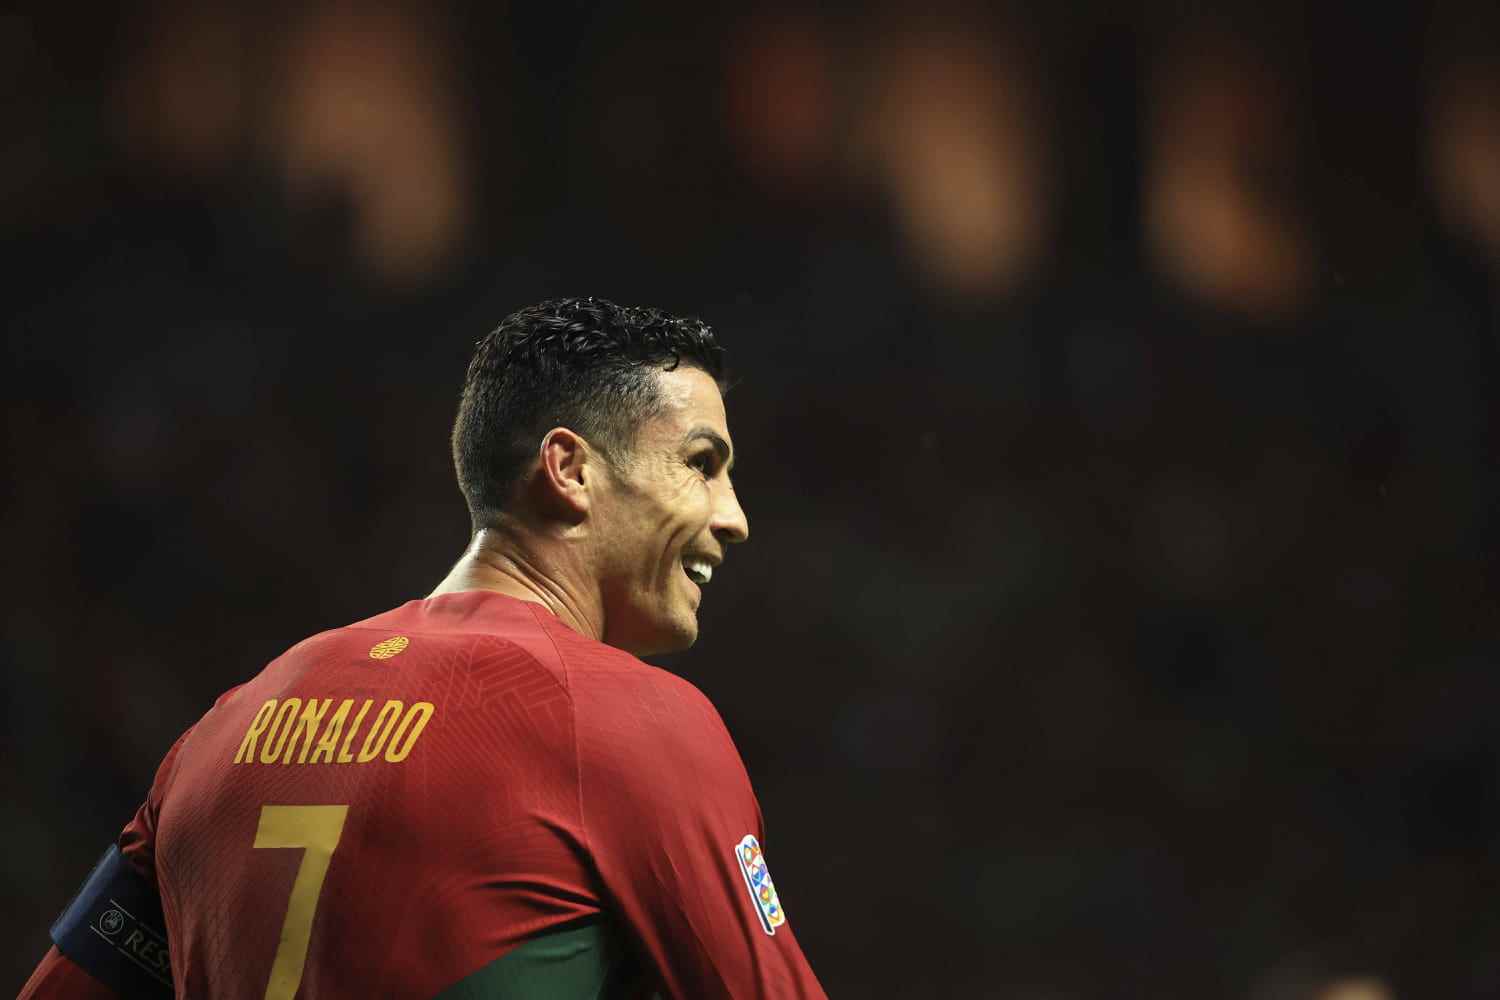 Portugal World Cup schedule dates, times and match broadcasts Earth